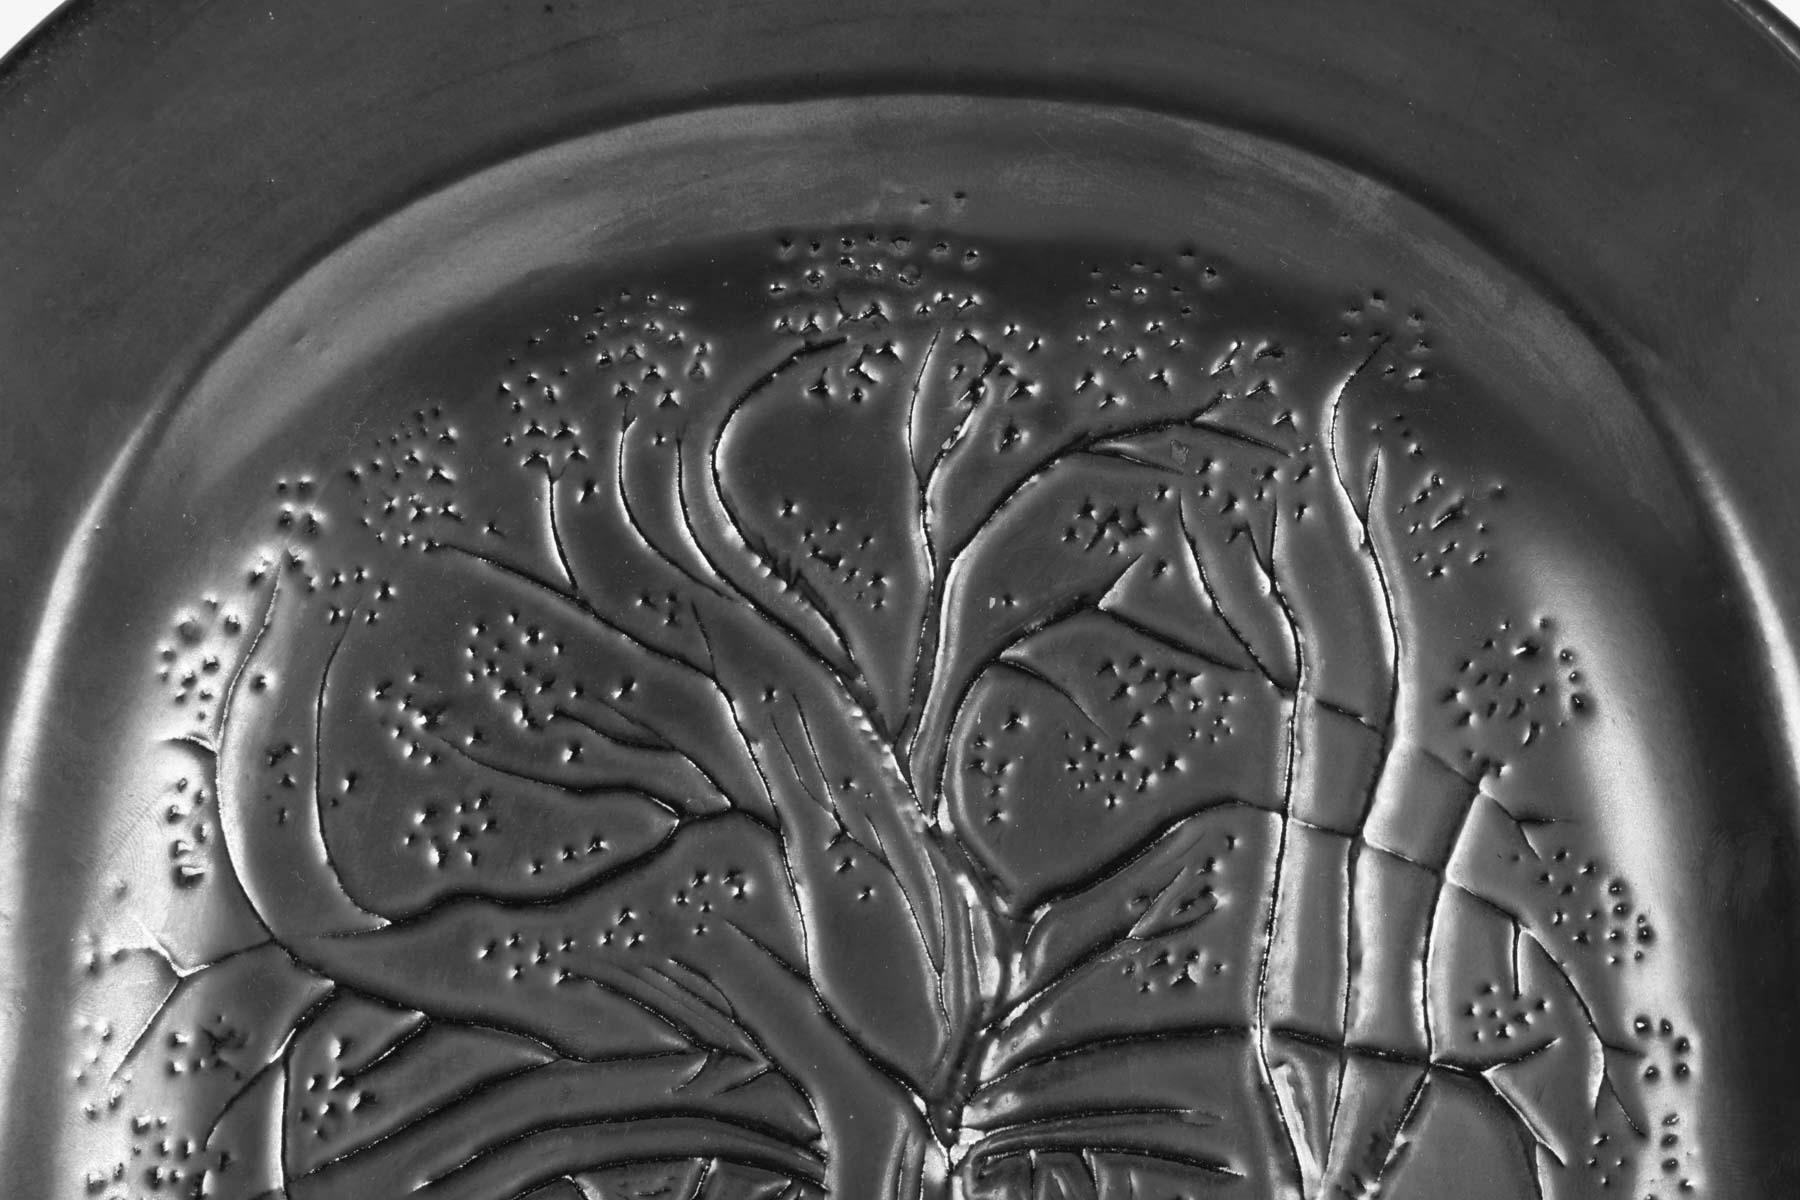 Poetical ceramic dish designed by Jean Marais in the 1960s.
The decor figures a hidden face among the branches of a tree. The drawing reveal the Jean Cocteau's influence. Black enameled ceramic.
Signature Jean Marais located on the dish border.
 